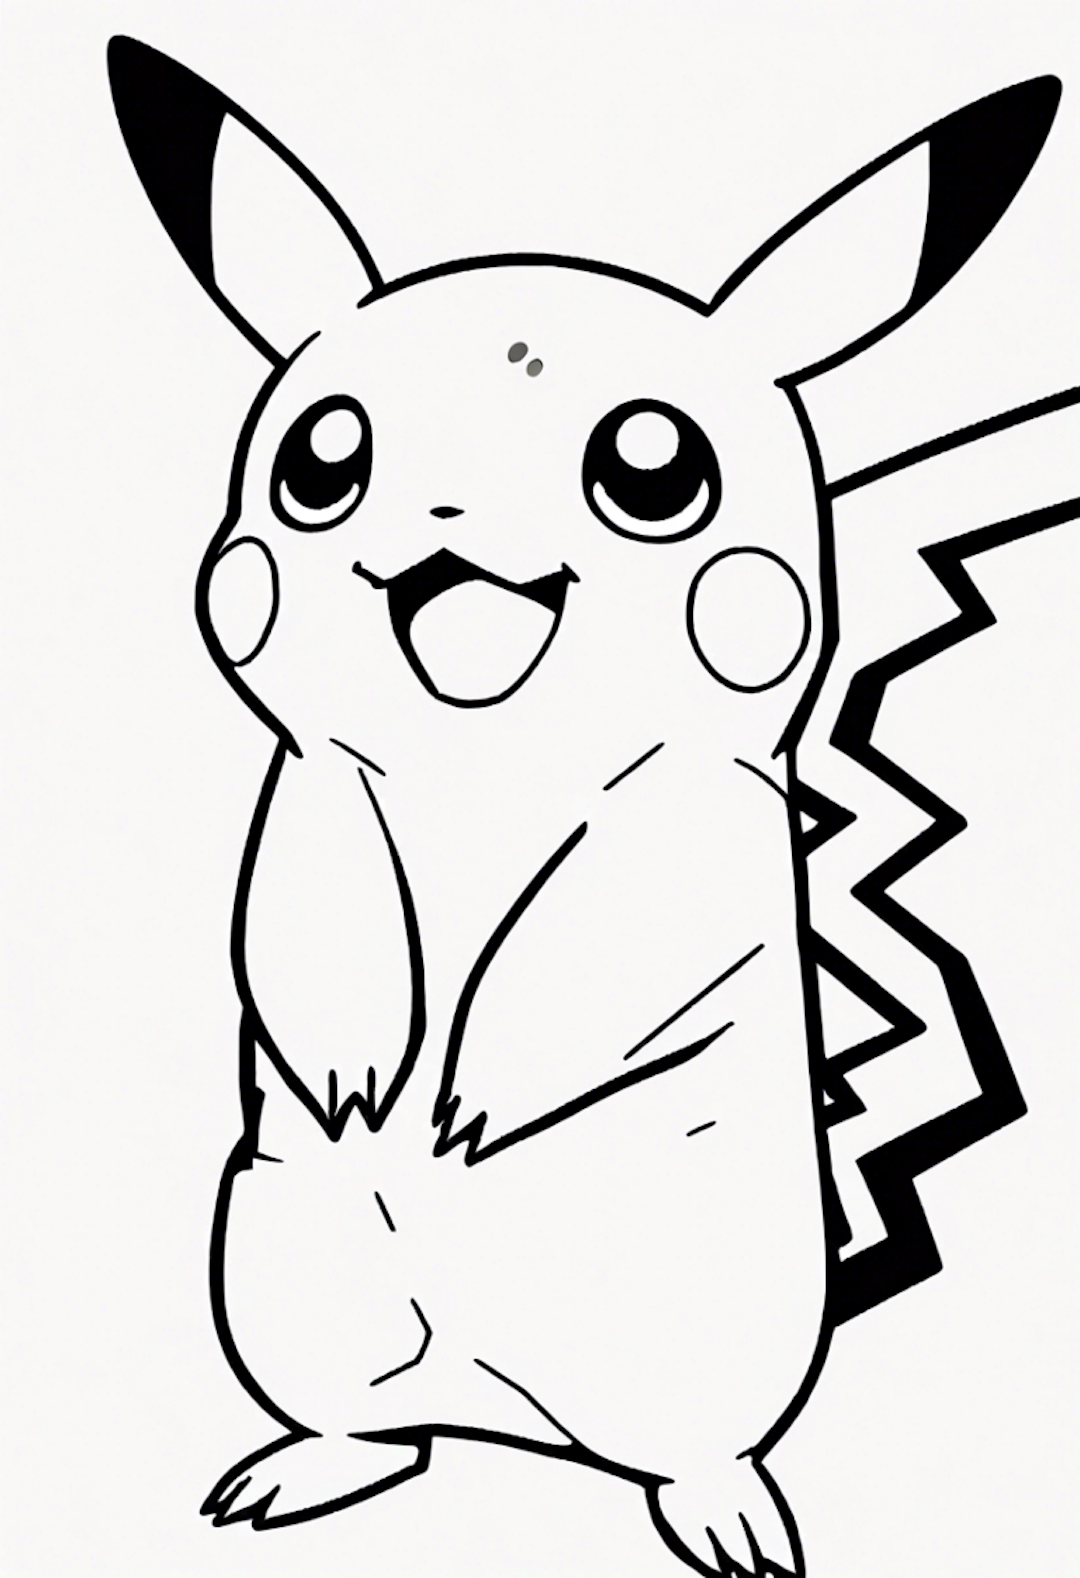 Pikachu Smiling Coloring Page coloring pages